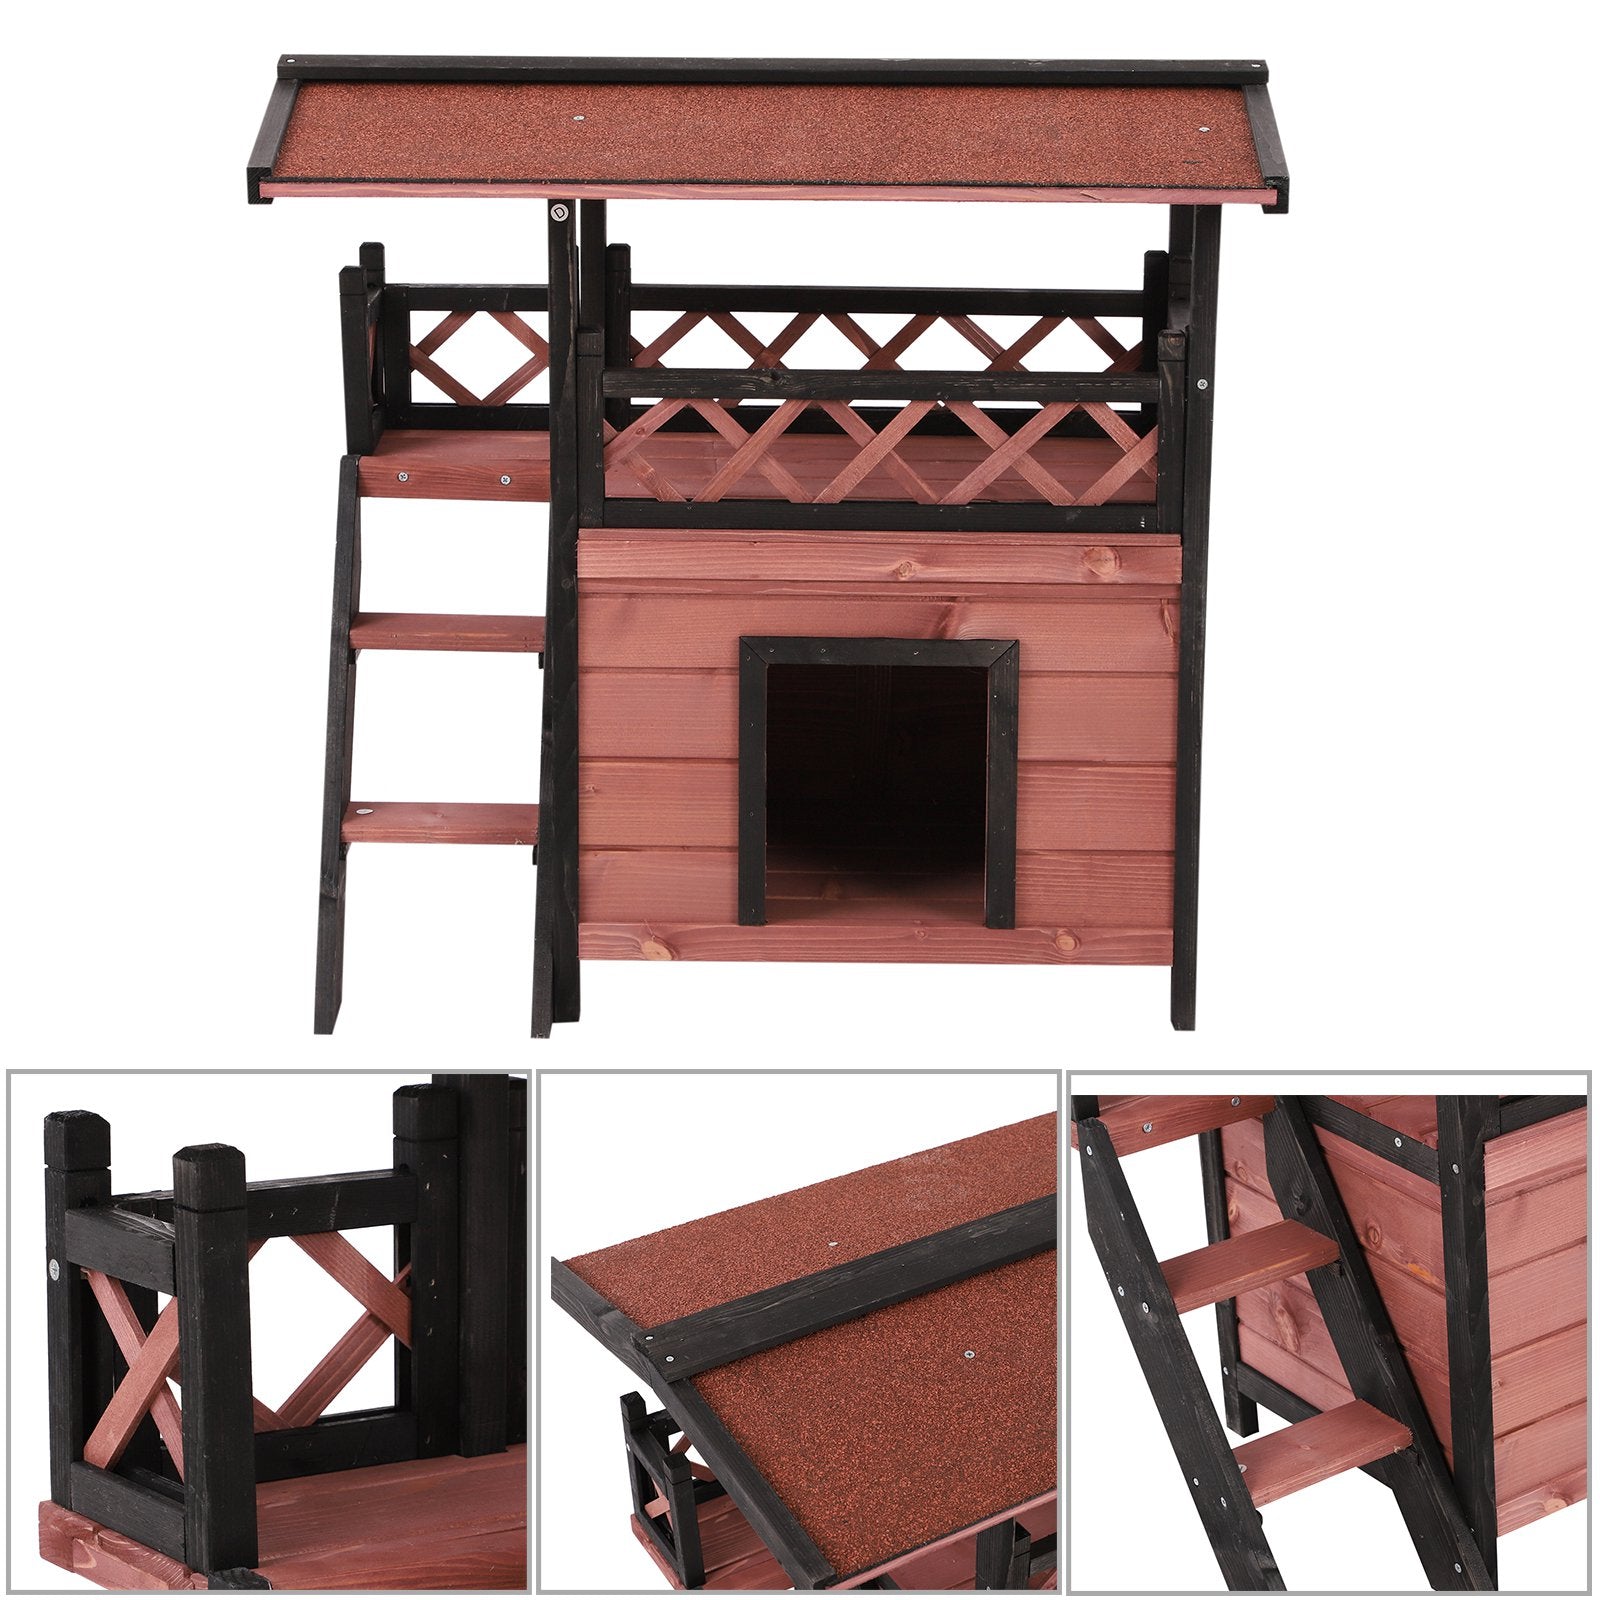 Wood Cat House Outdoor Luxury Wooden Room View Patio Weatherproof Shelter Puppy Garden Scratch Post Large Kennel Crate